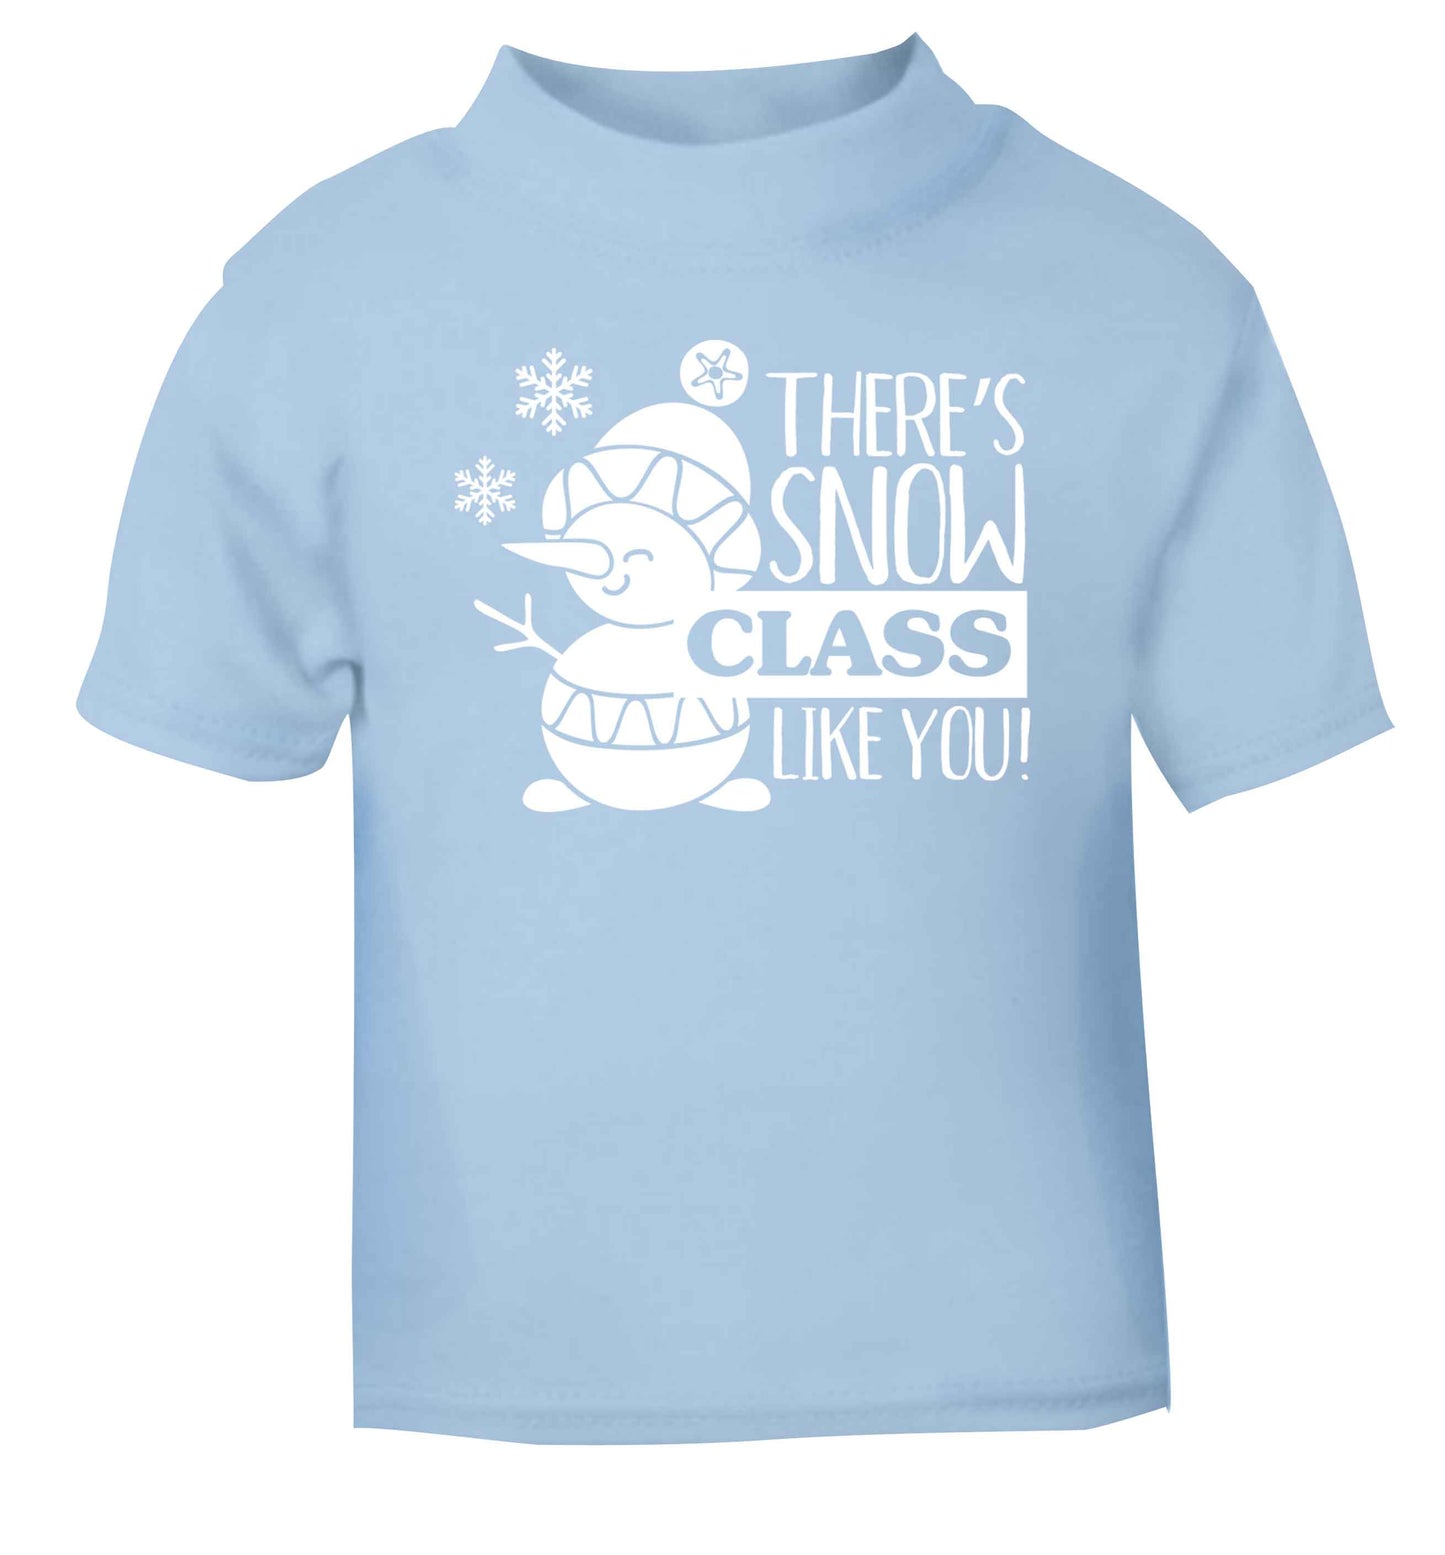 There's snow class like you light blue baby toddler Tshirt 2 Years